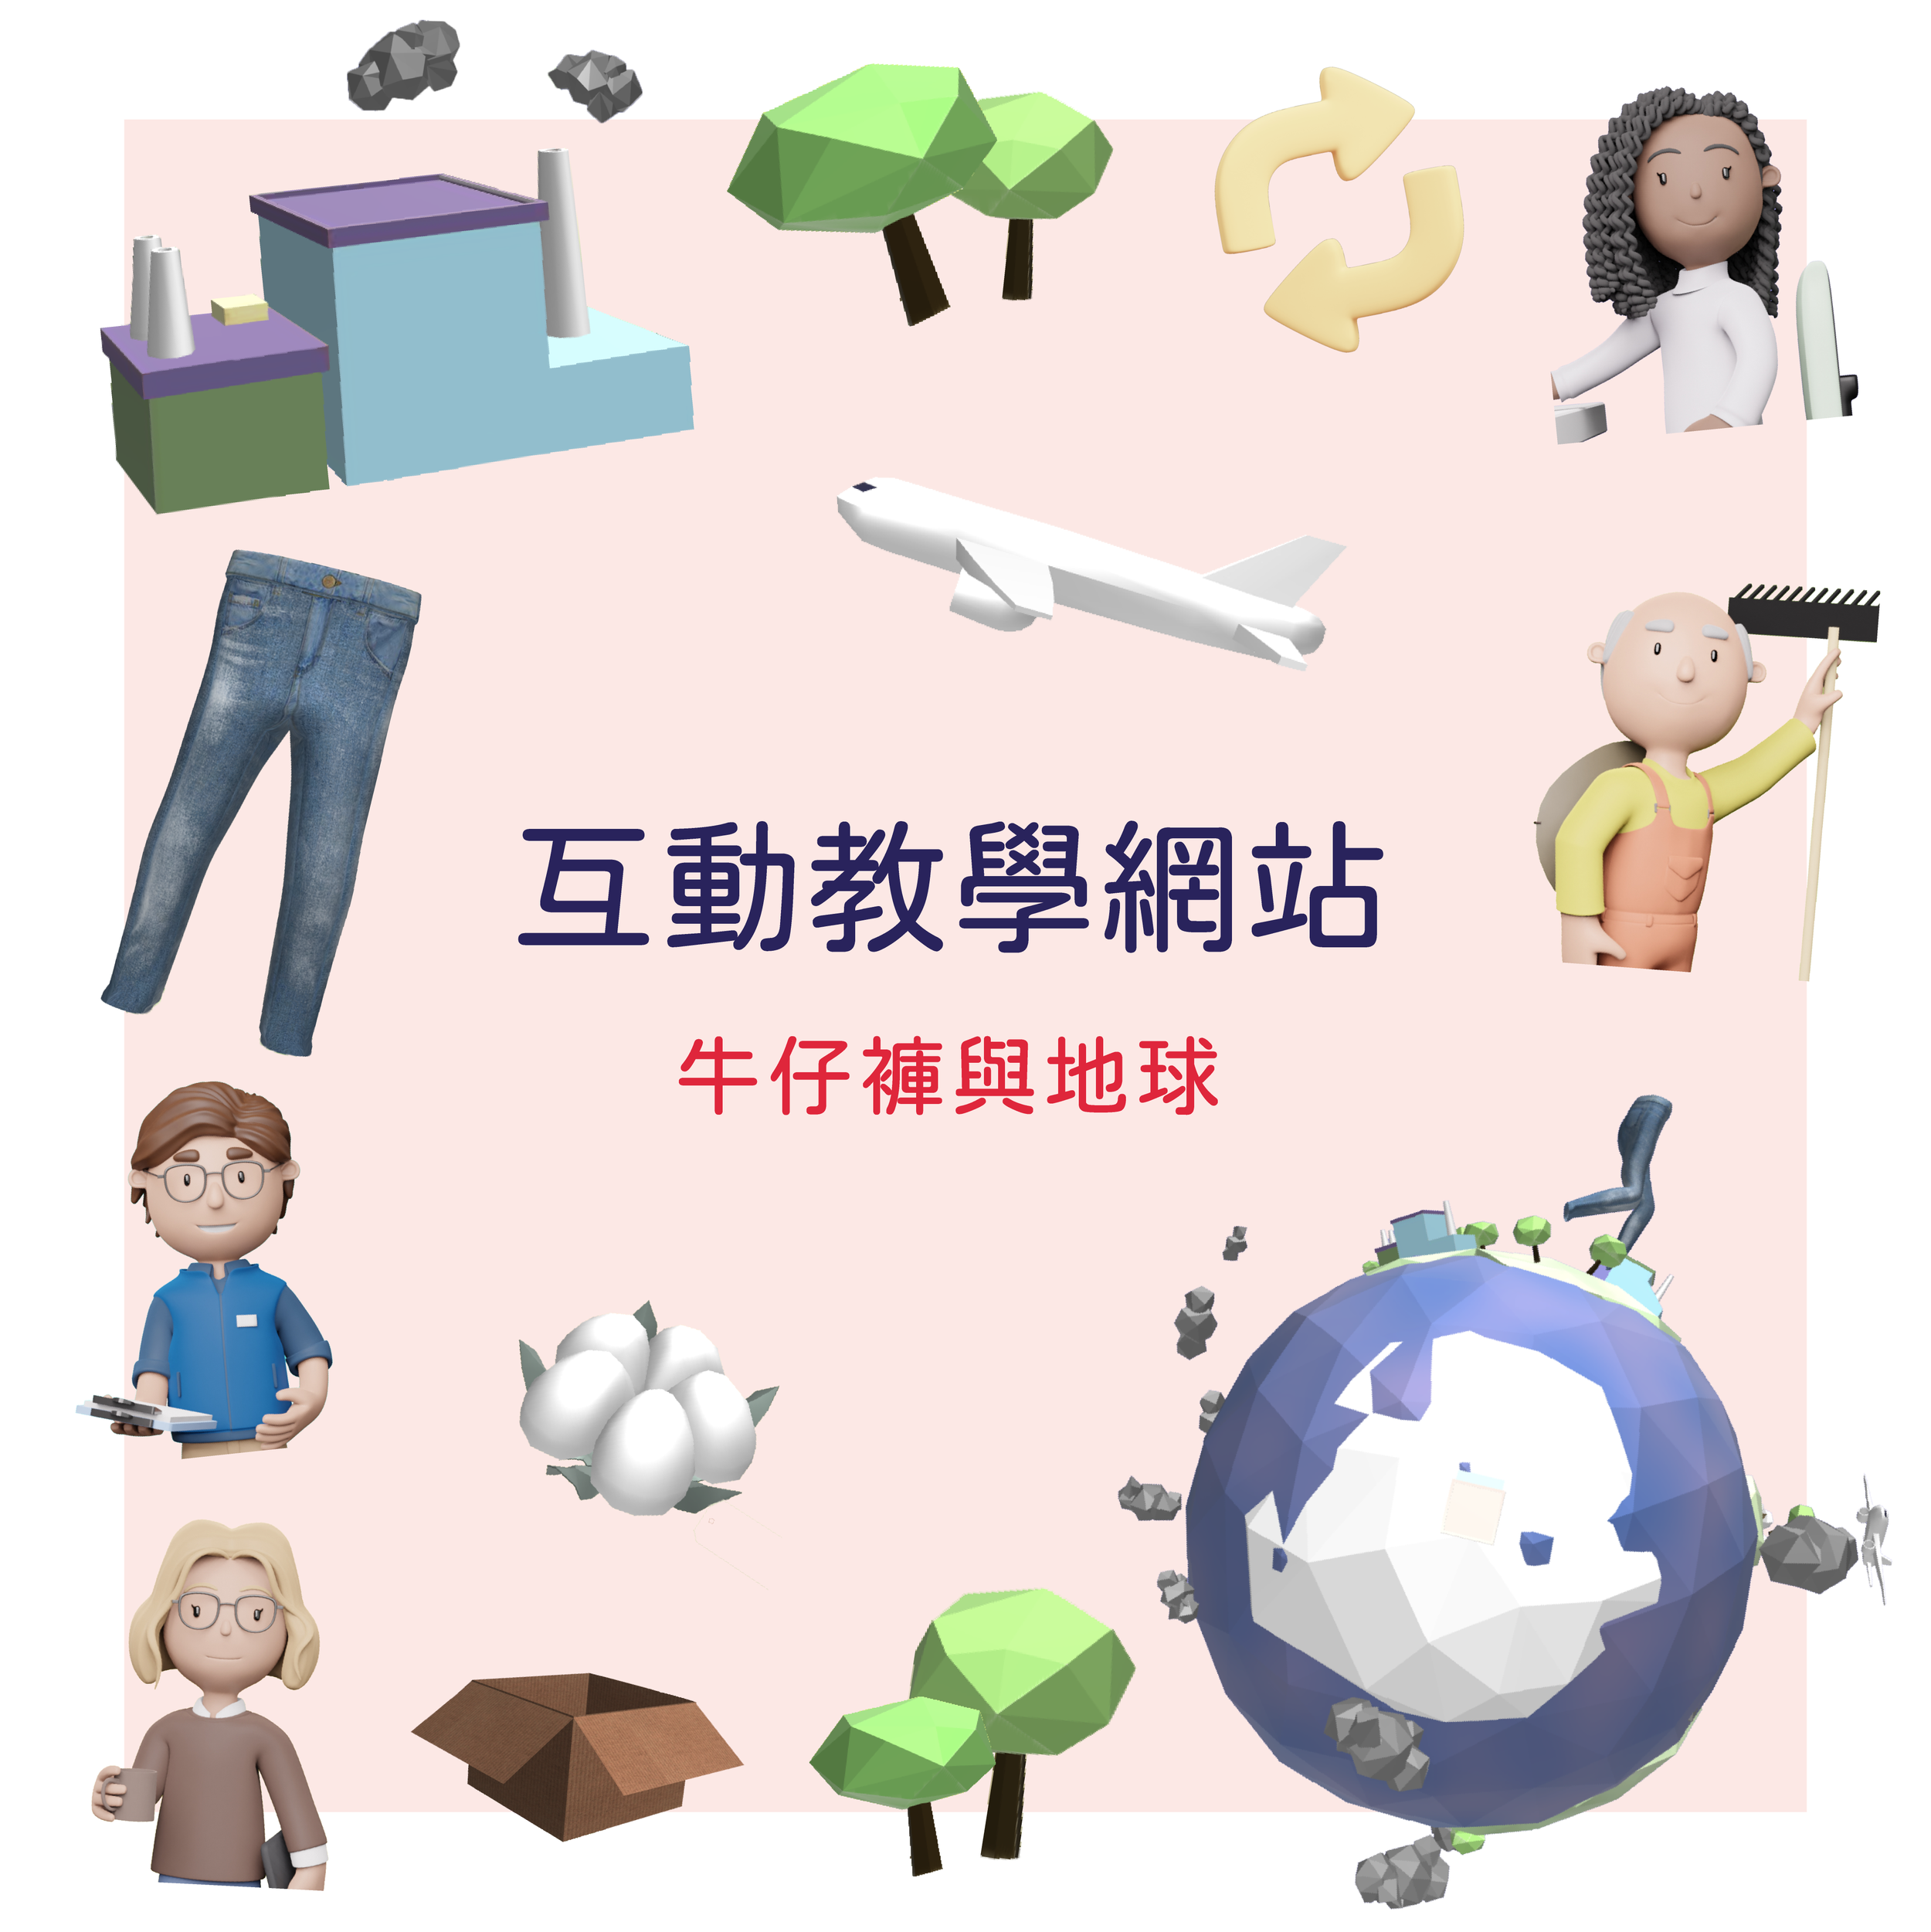 CN_Phone_INTERACTIVE LEARNING WEBSITE.png